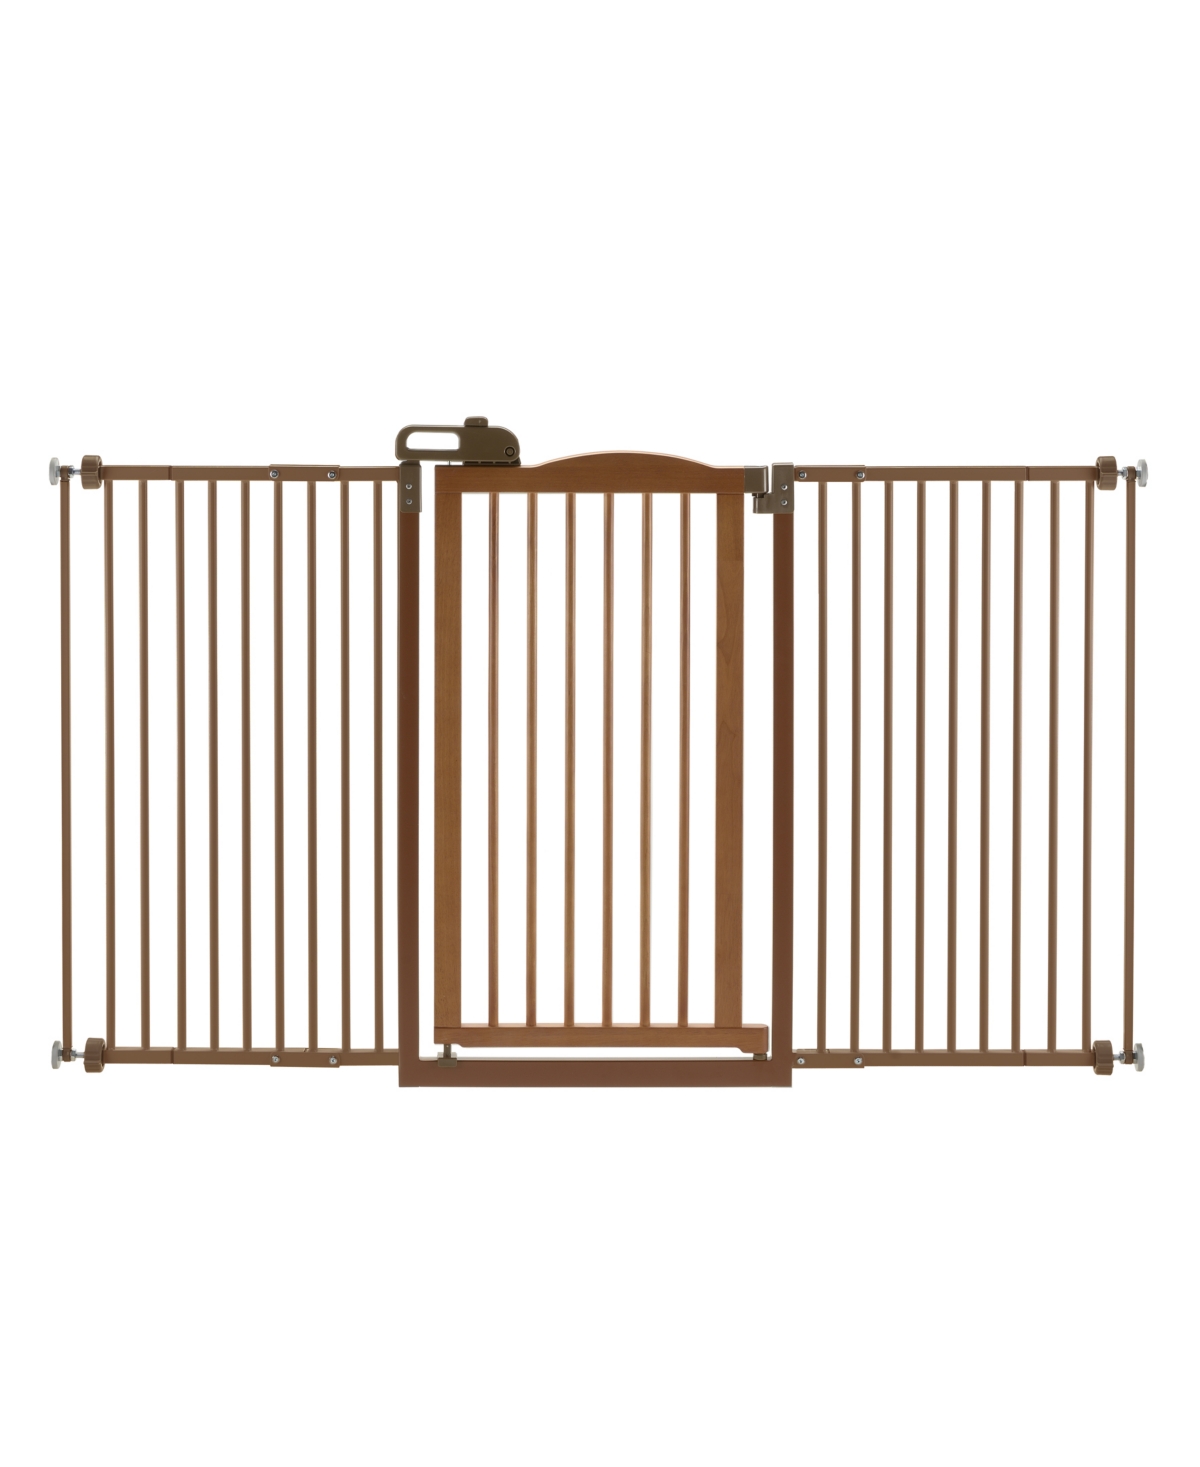 Tall One-Touch Gate Ii Wide - Brown